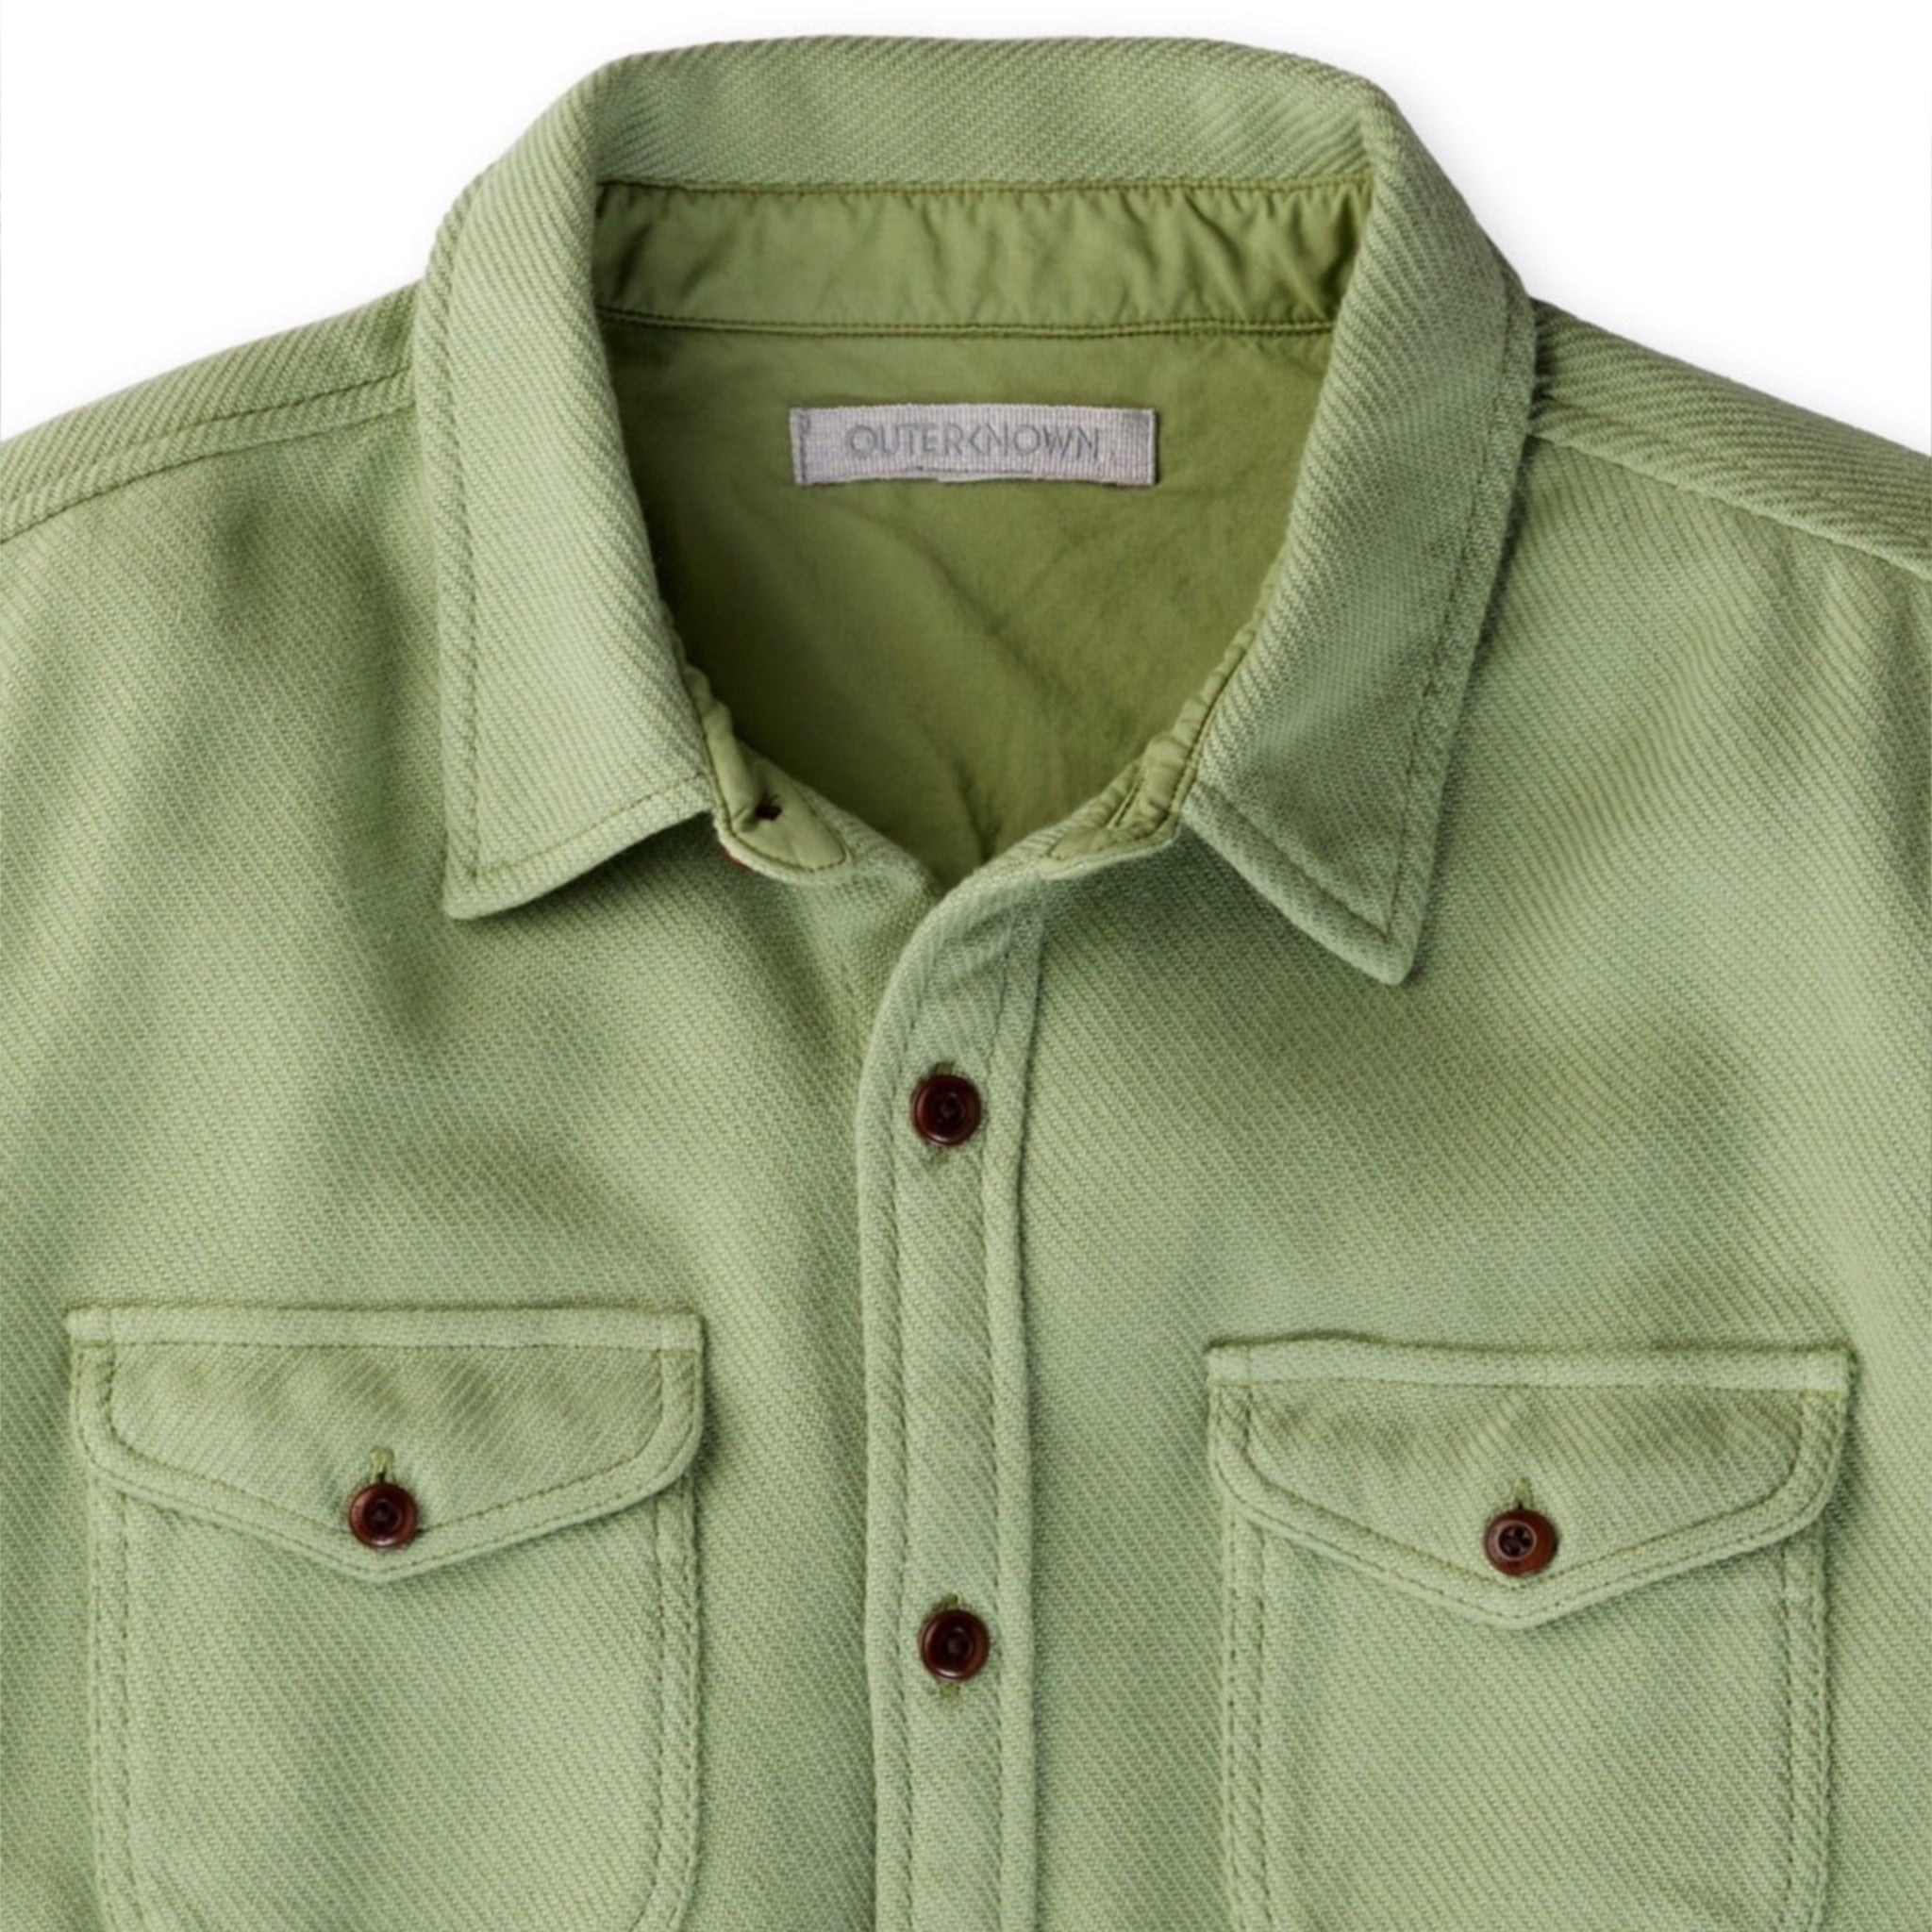 Outerknown Chroma Blanket Shirt - Bay Leaf